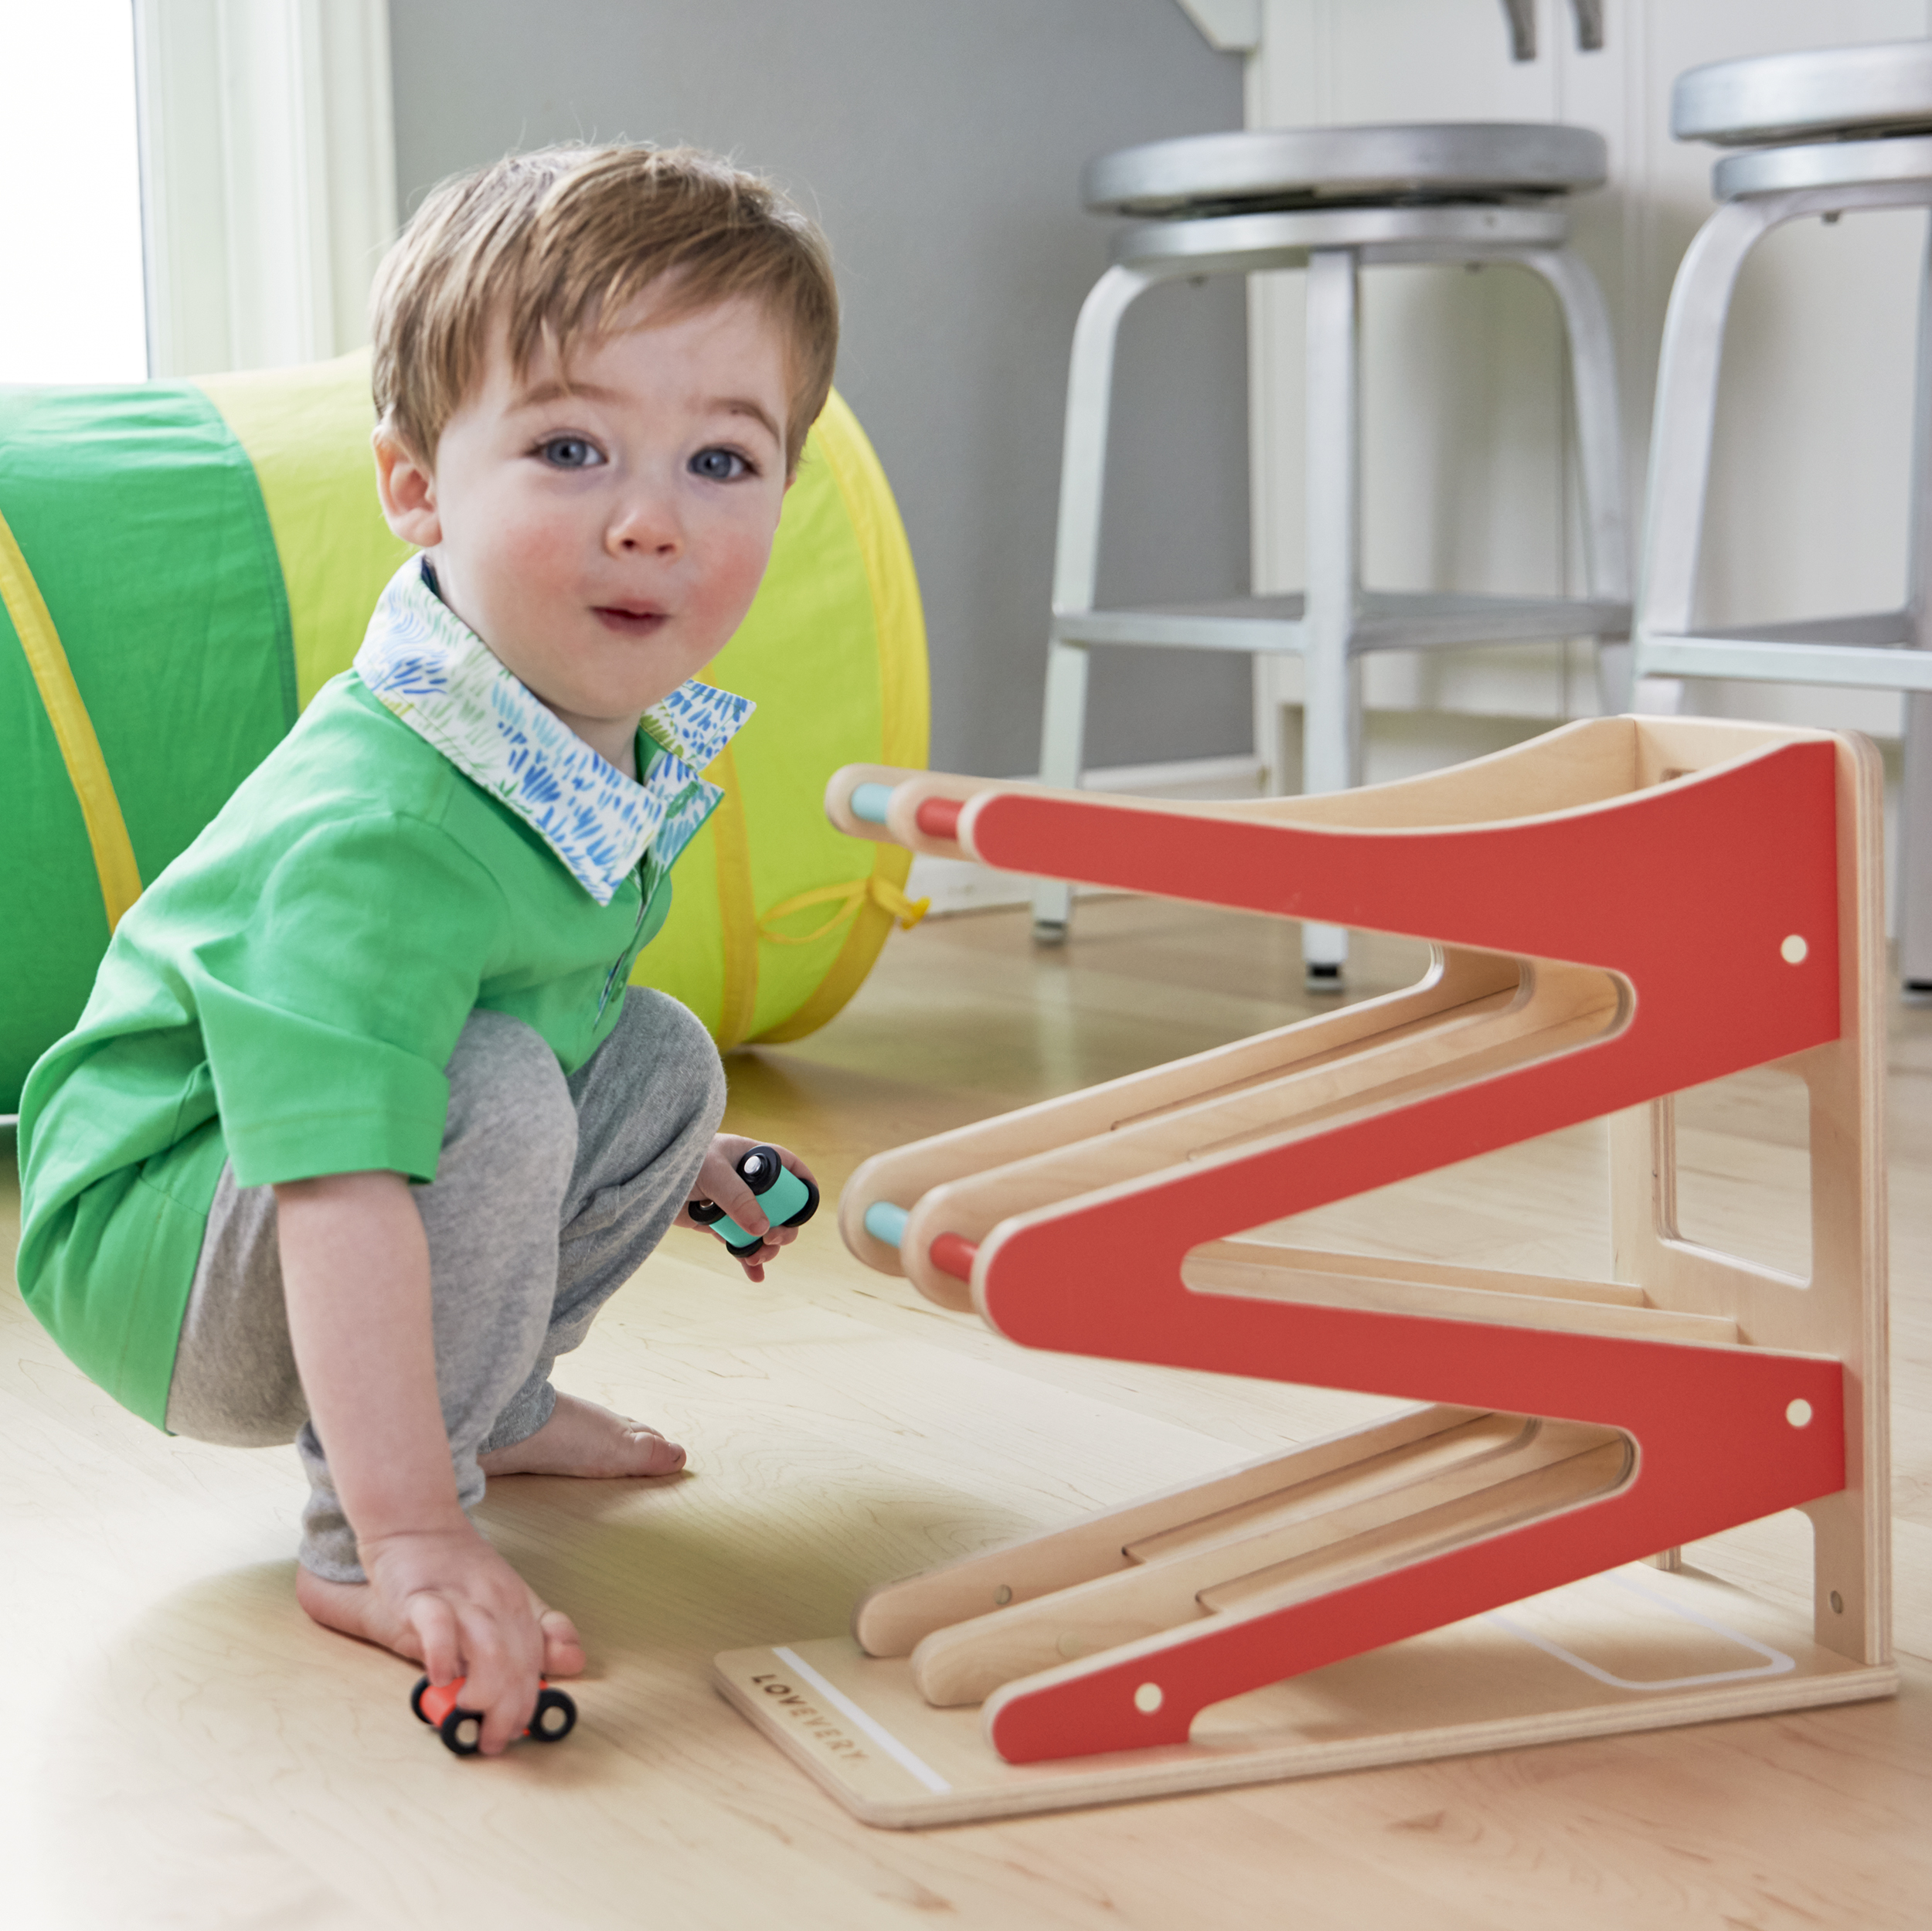 play kits for babies